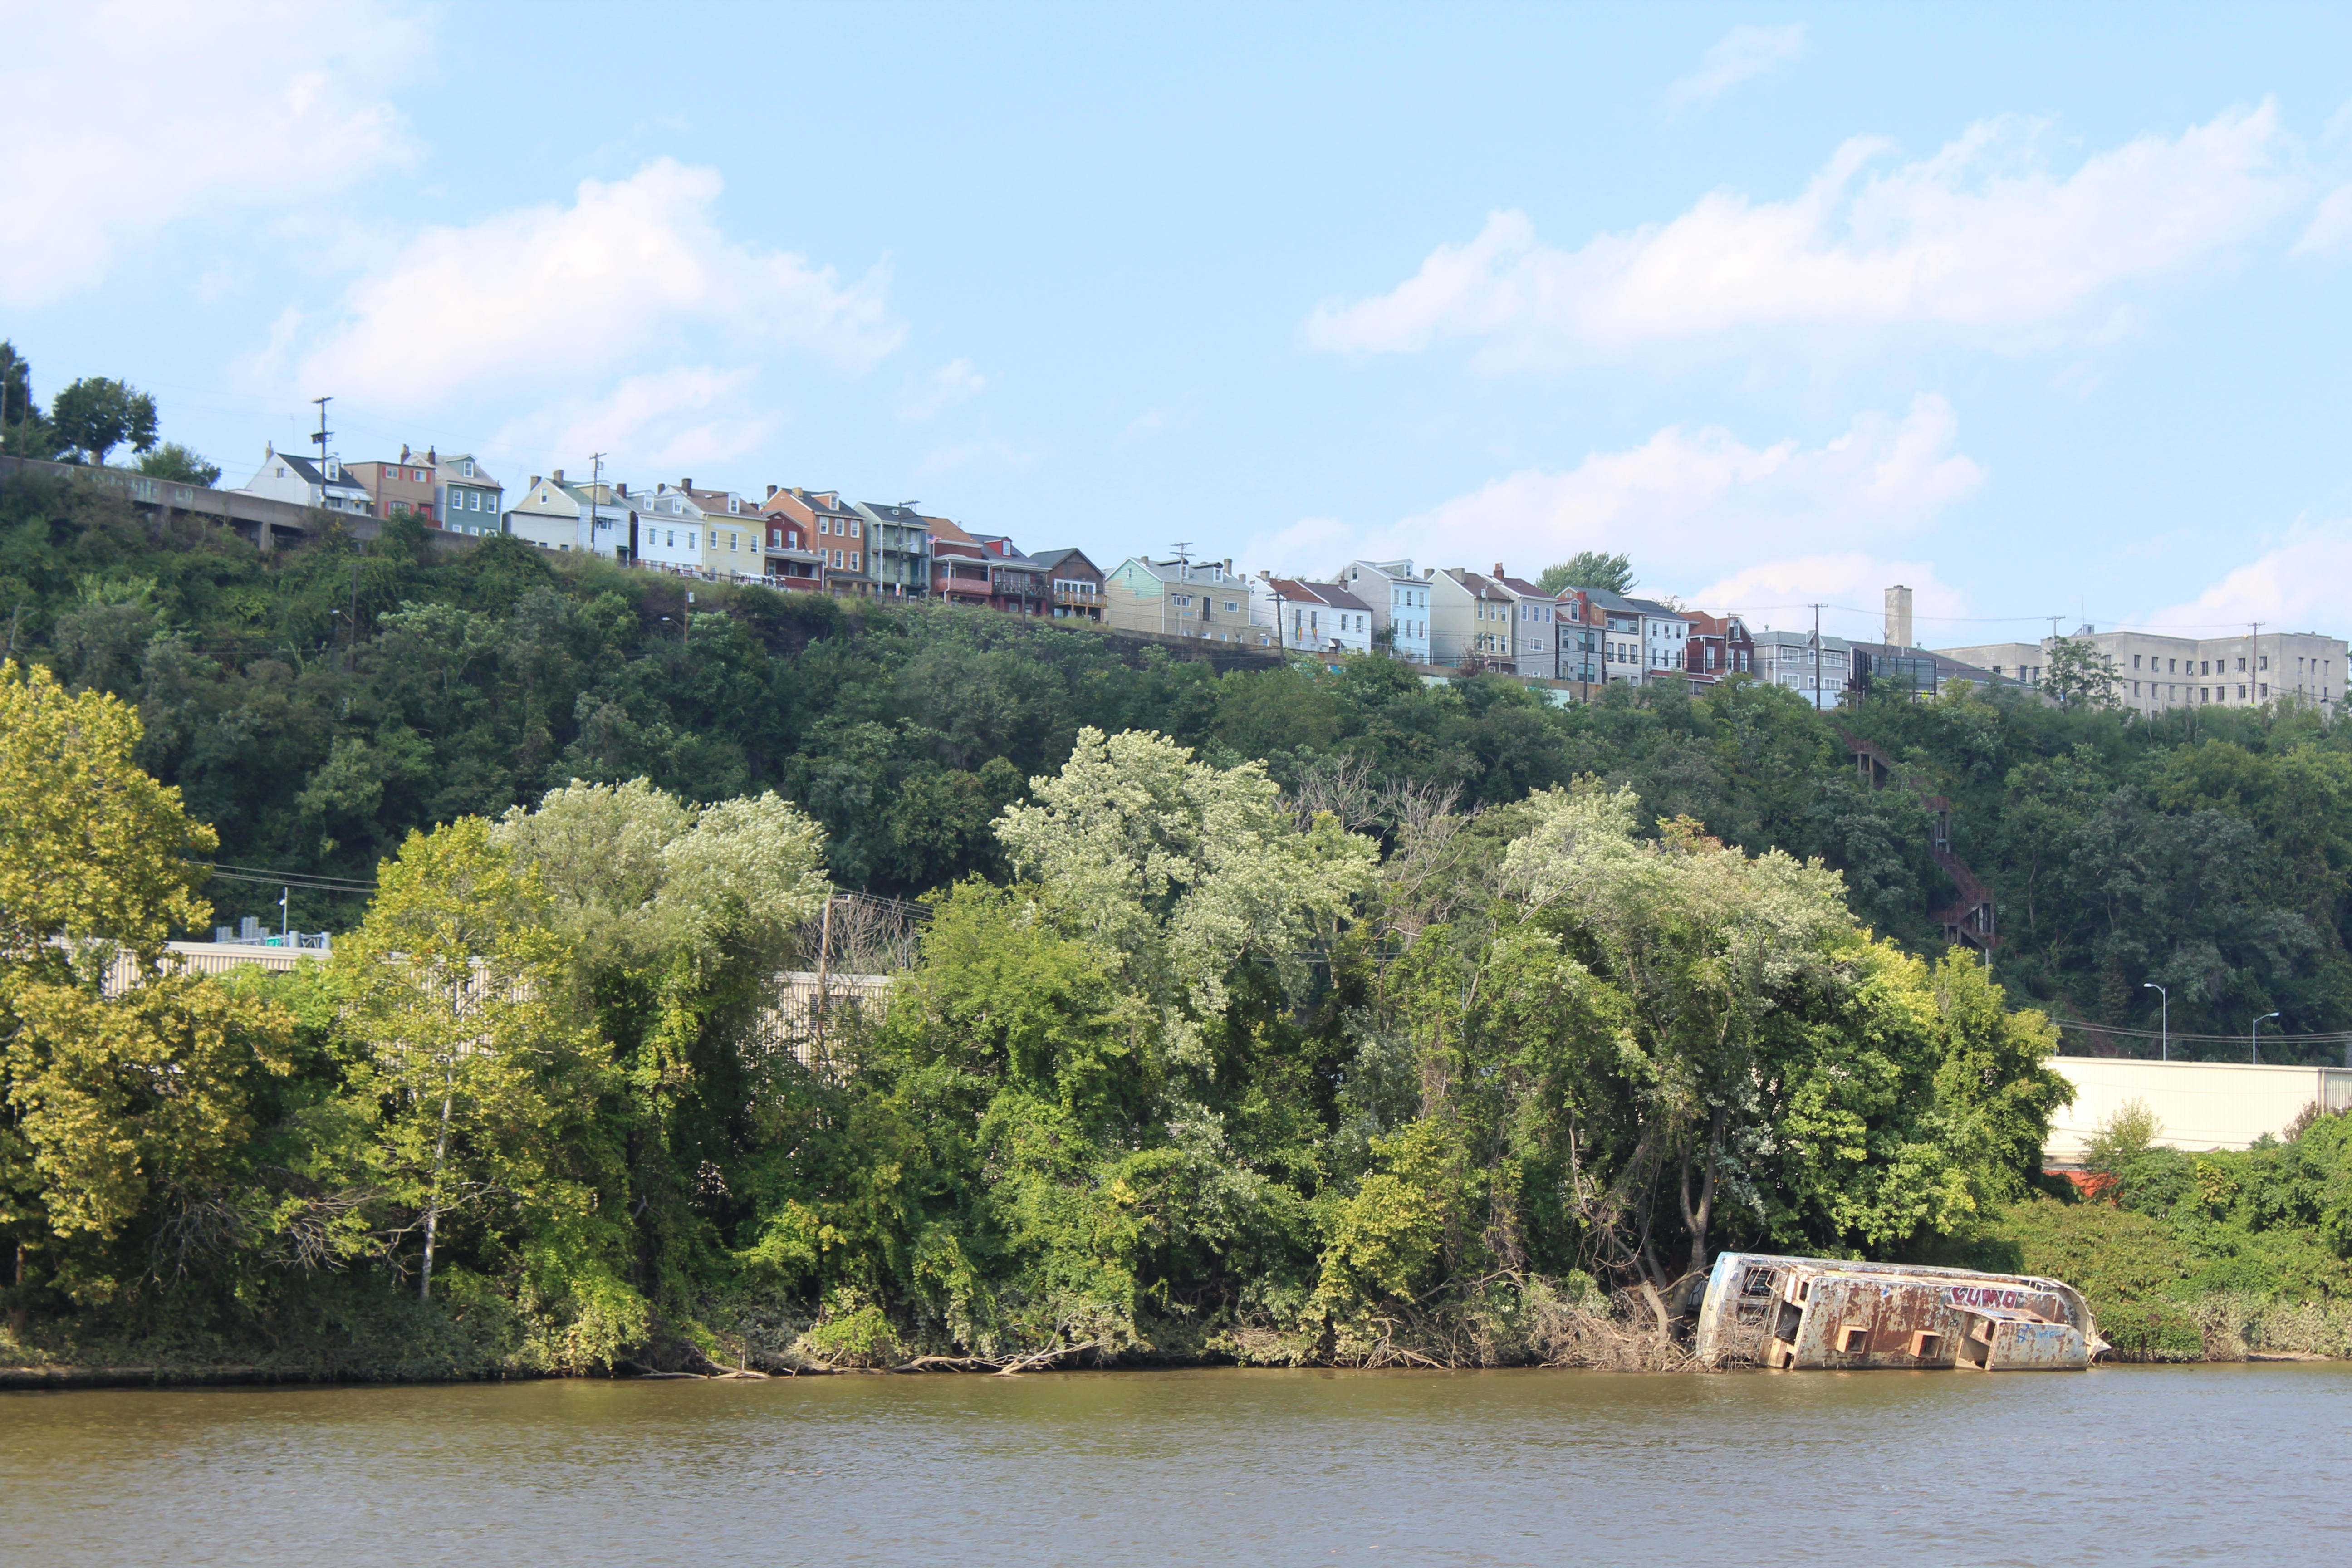 Trees are very much alive along the riverbank and up the hillside. Taken by Jenalee Janes.